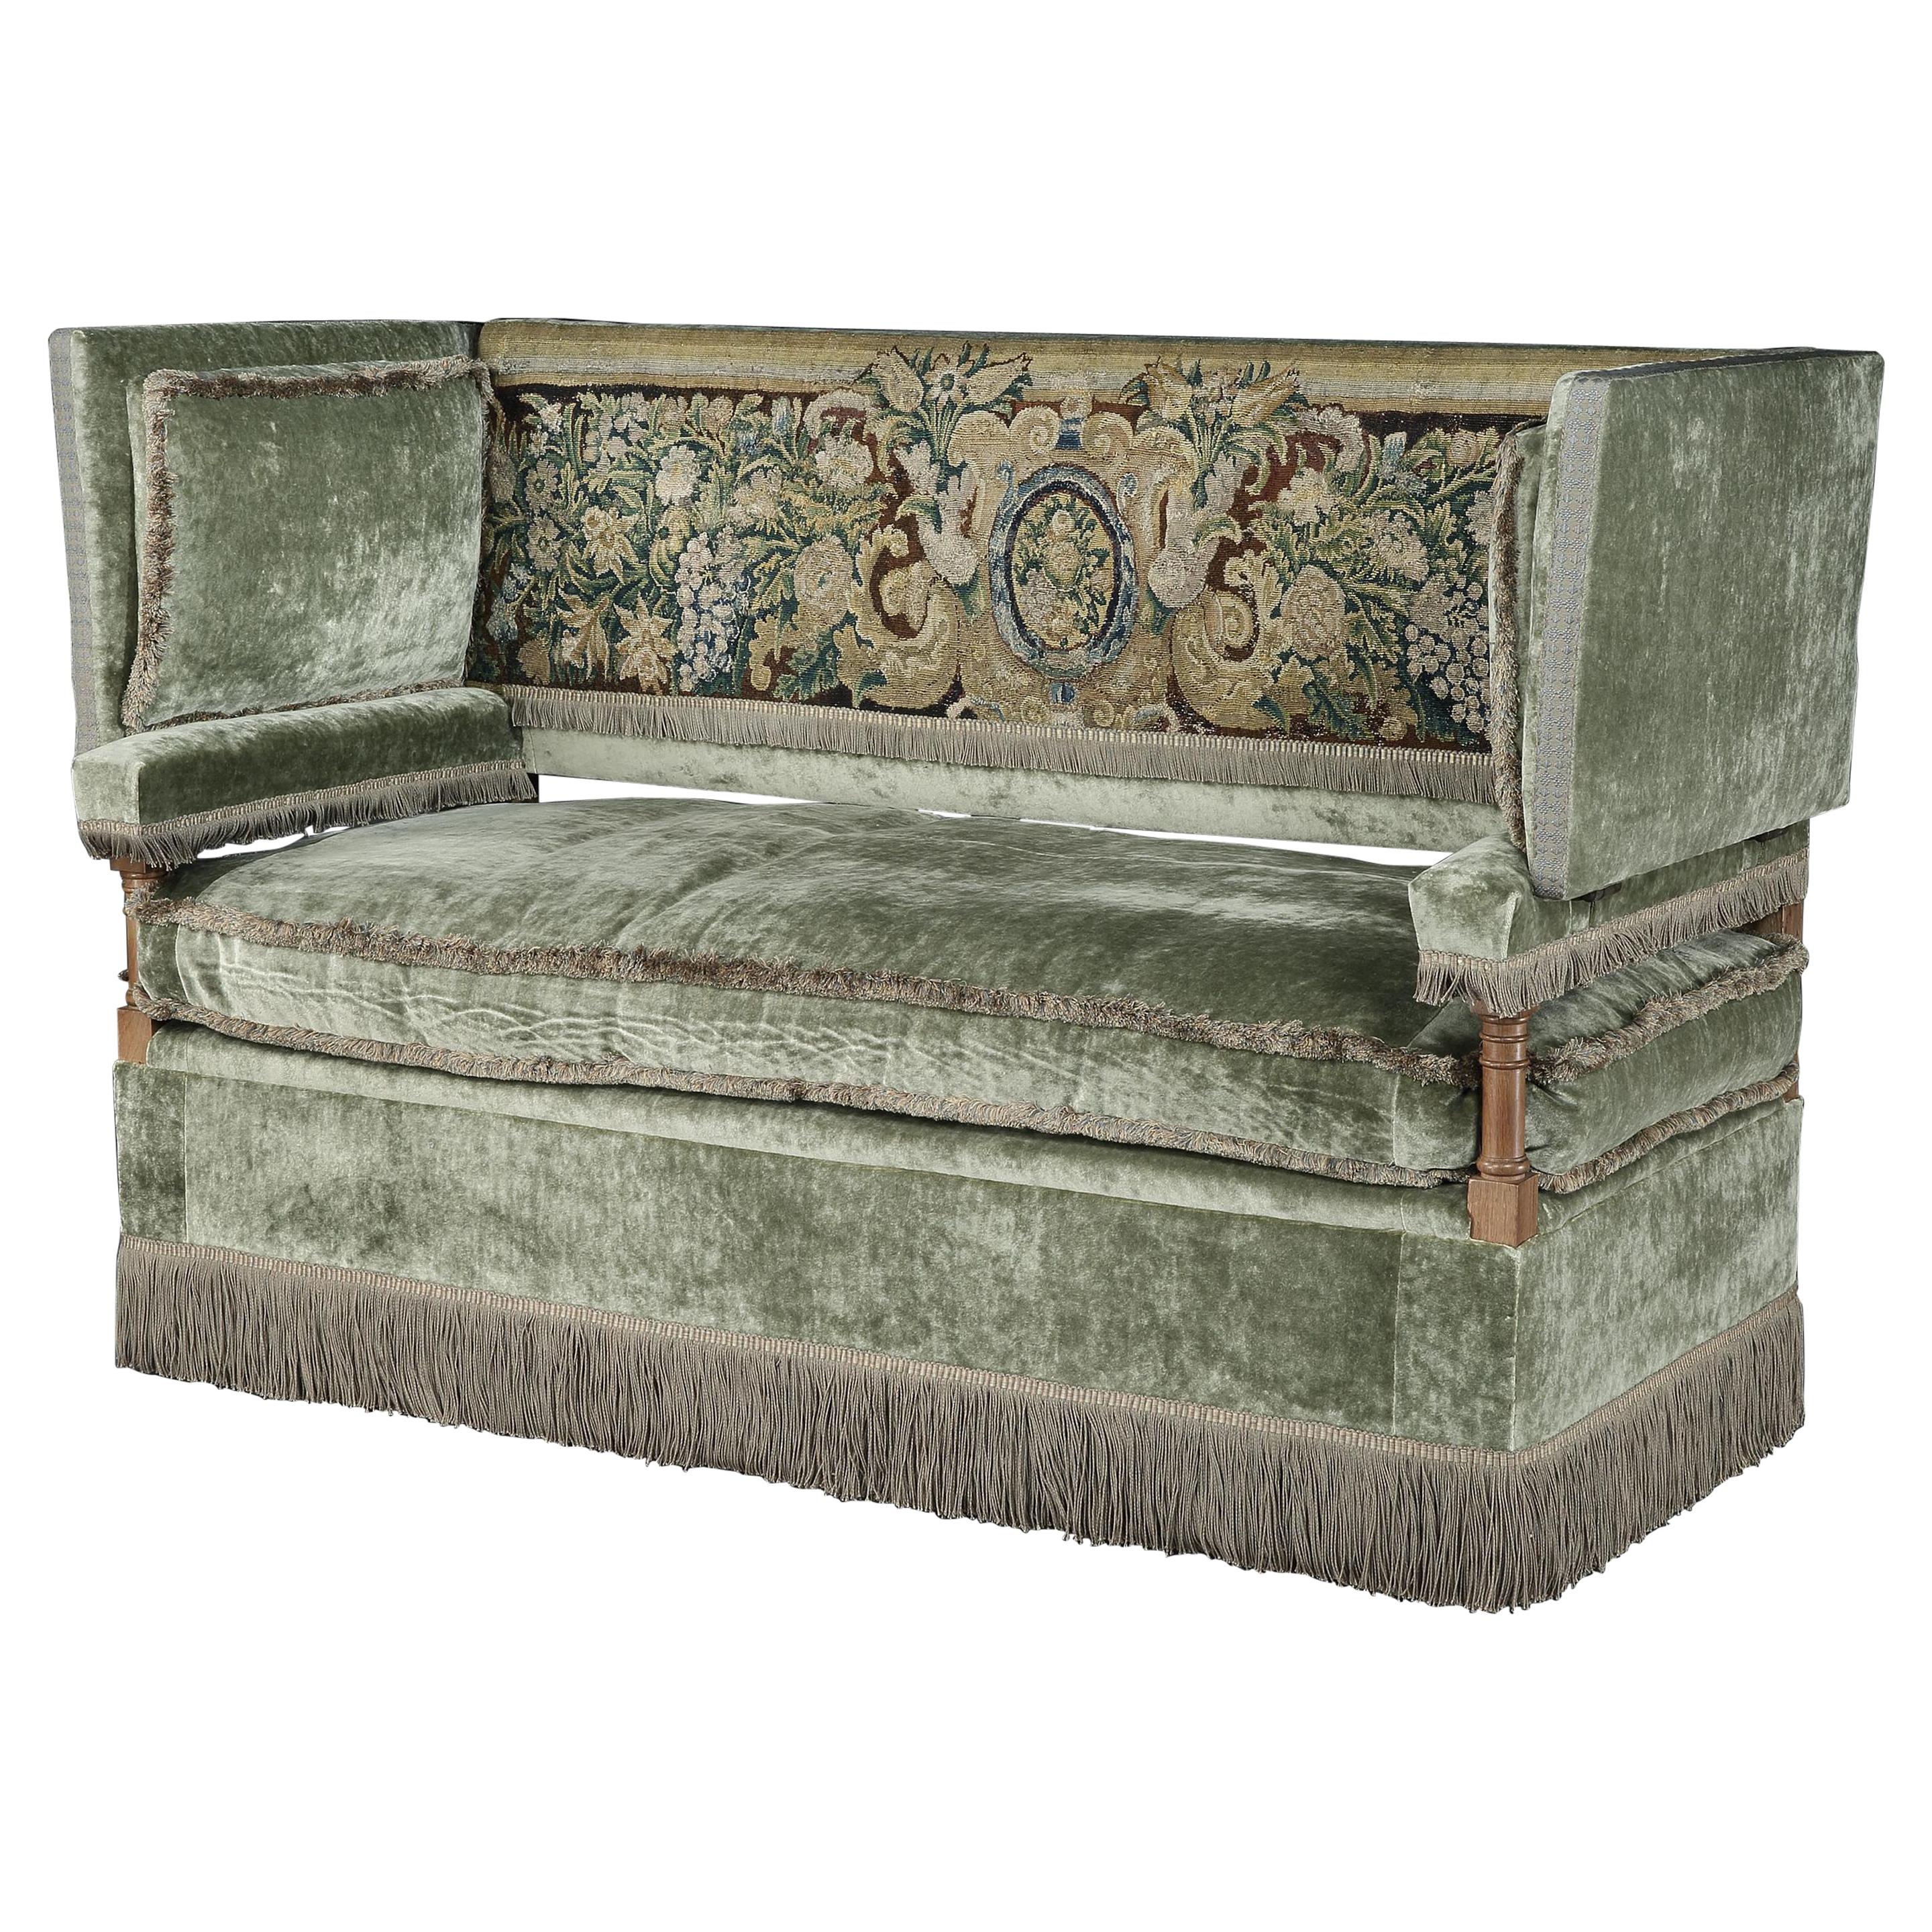 Table Knole Settee, Cowdray Park, Angleterre, Lengyon & Co, velours olive, tapisserie